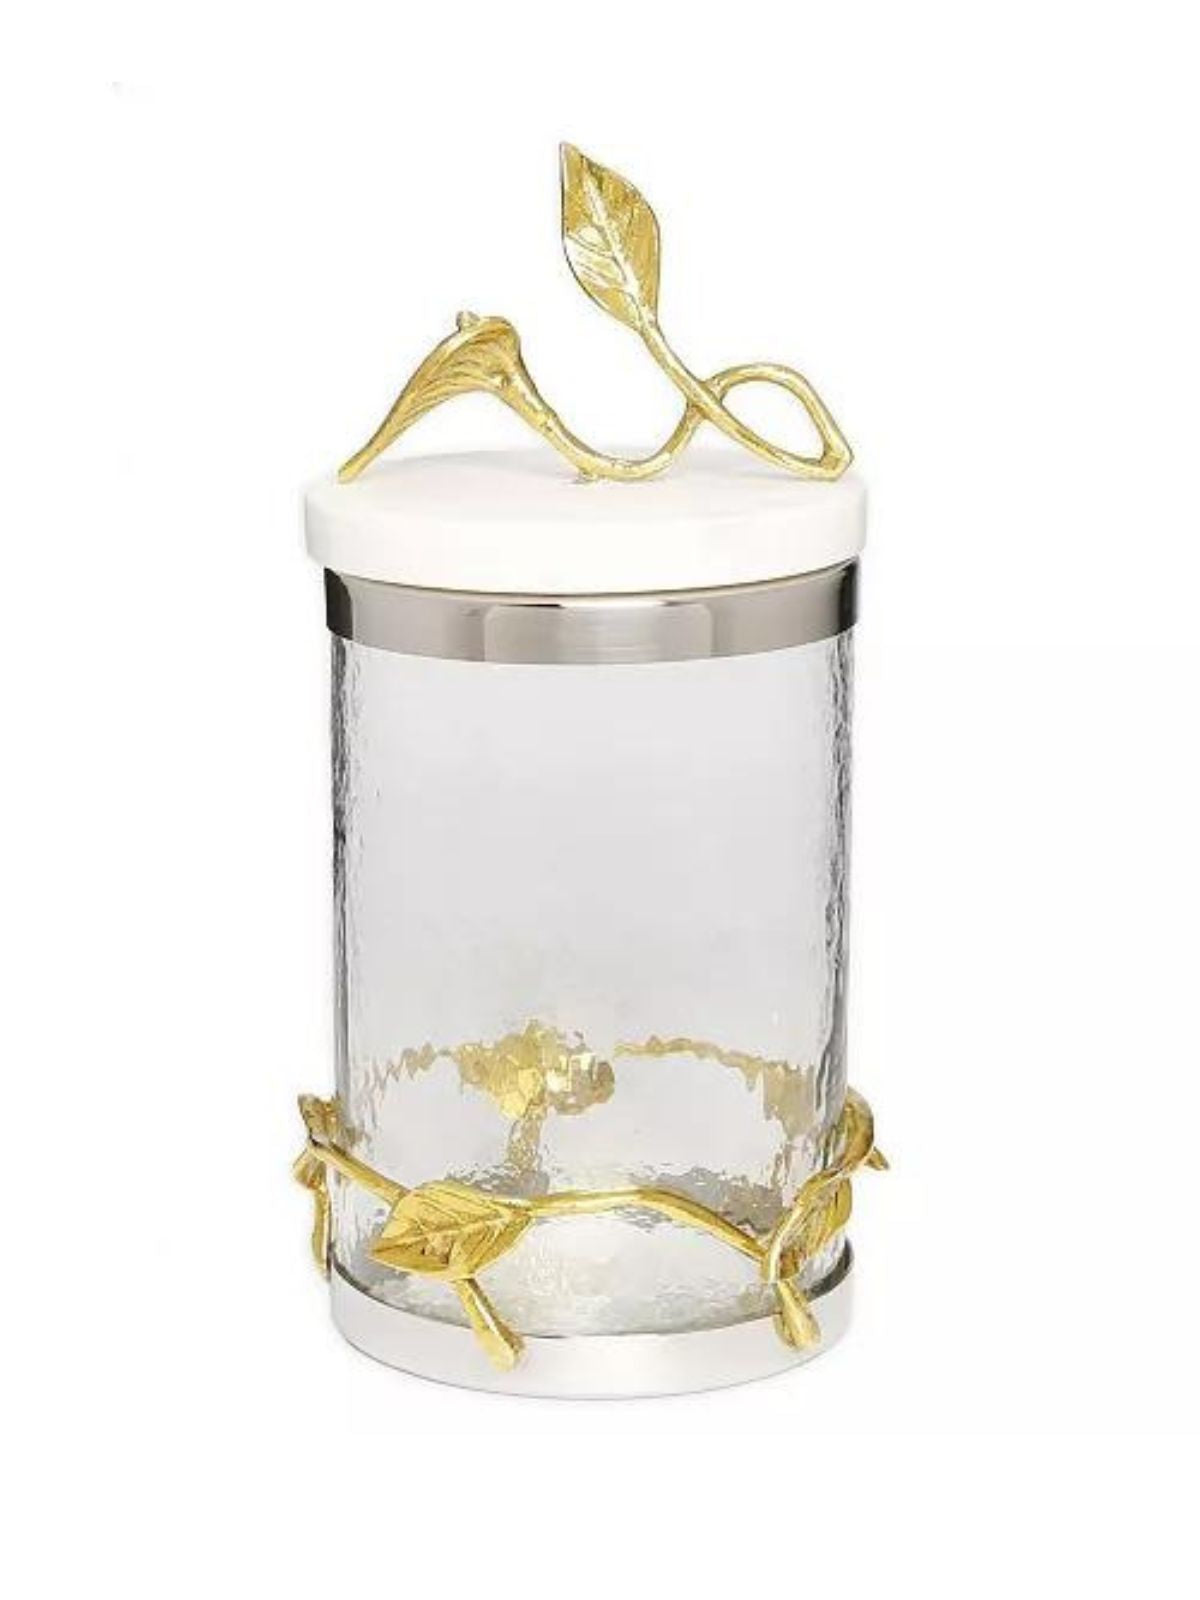 7H Luxury Glass Kitchen Canister With Gold Leaf Design and Marble Lid - KYA Home Decor.